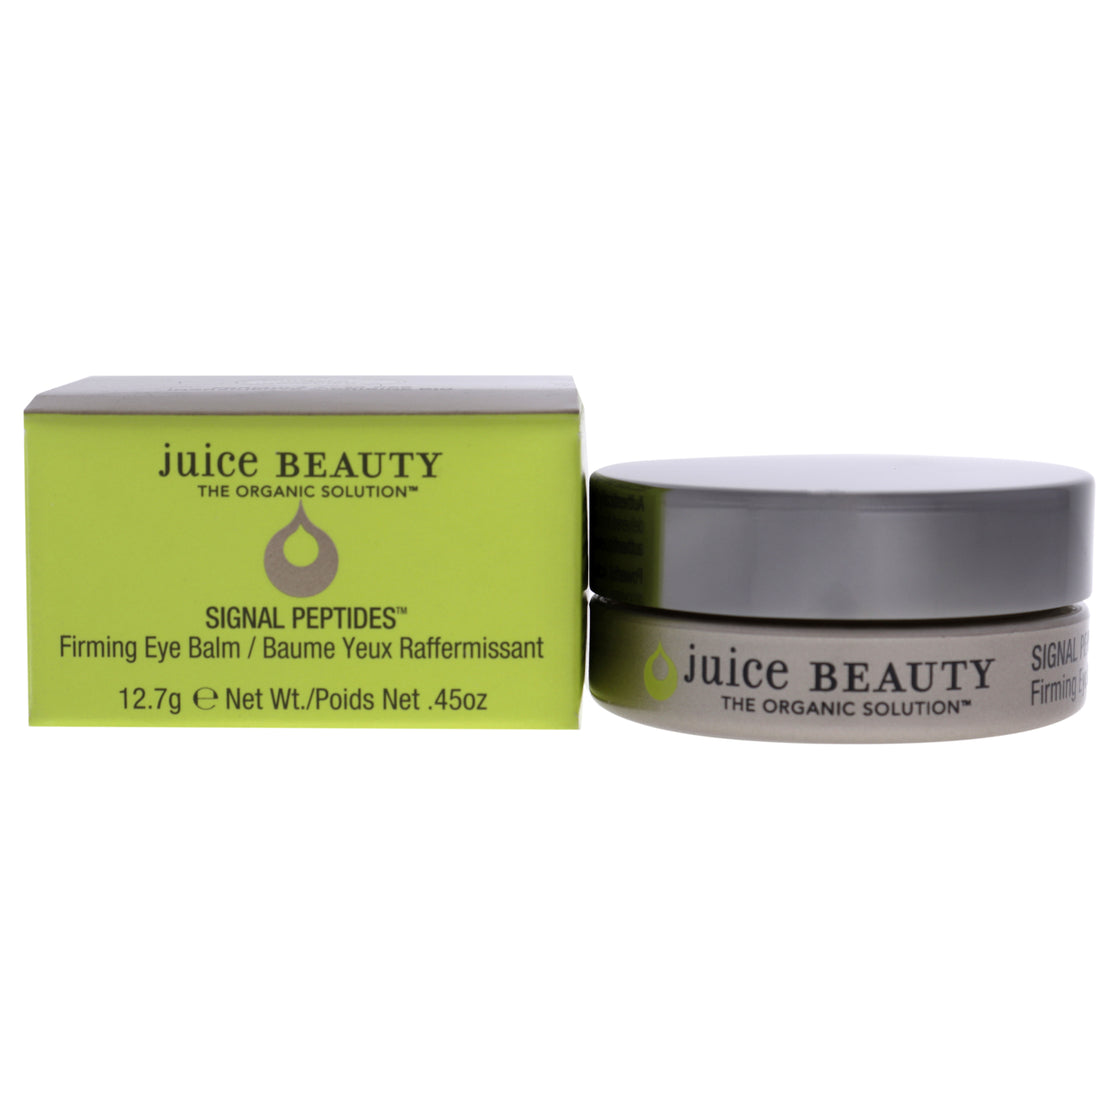 Signal Peptides Firming Eye Balm by Juice Beauty for Women - 0.45 oz Balm